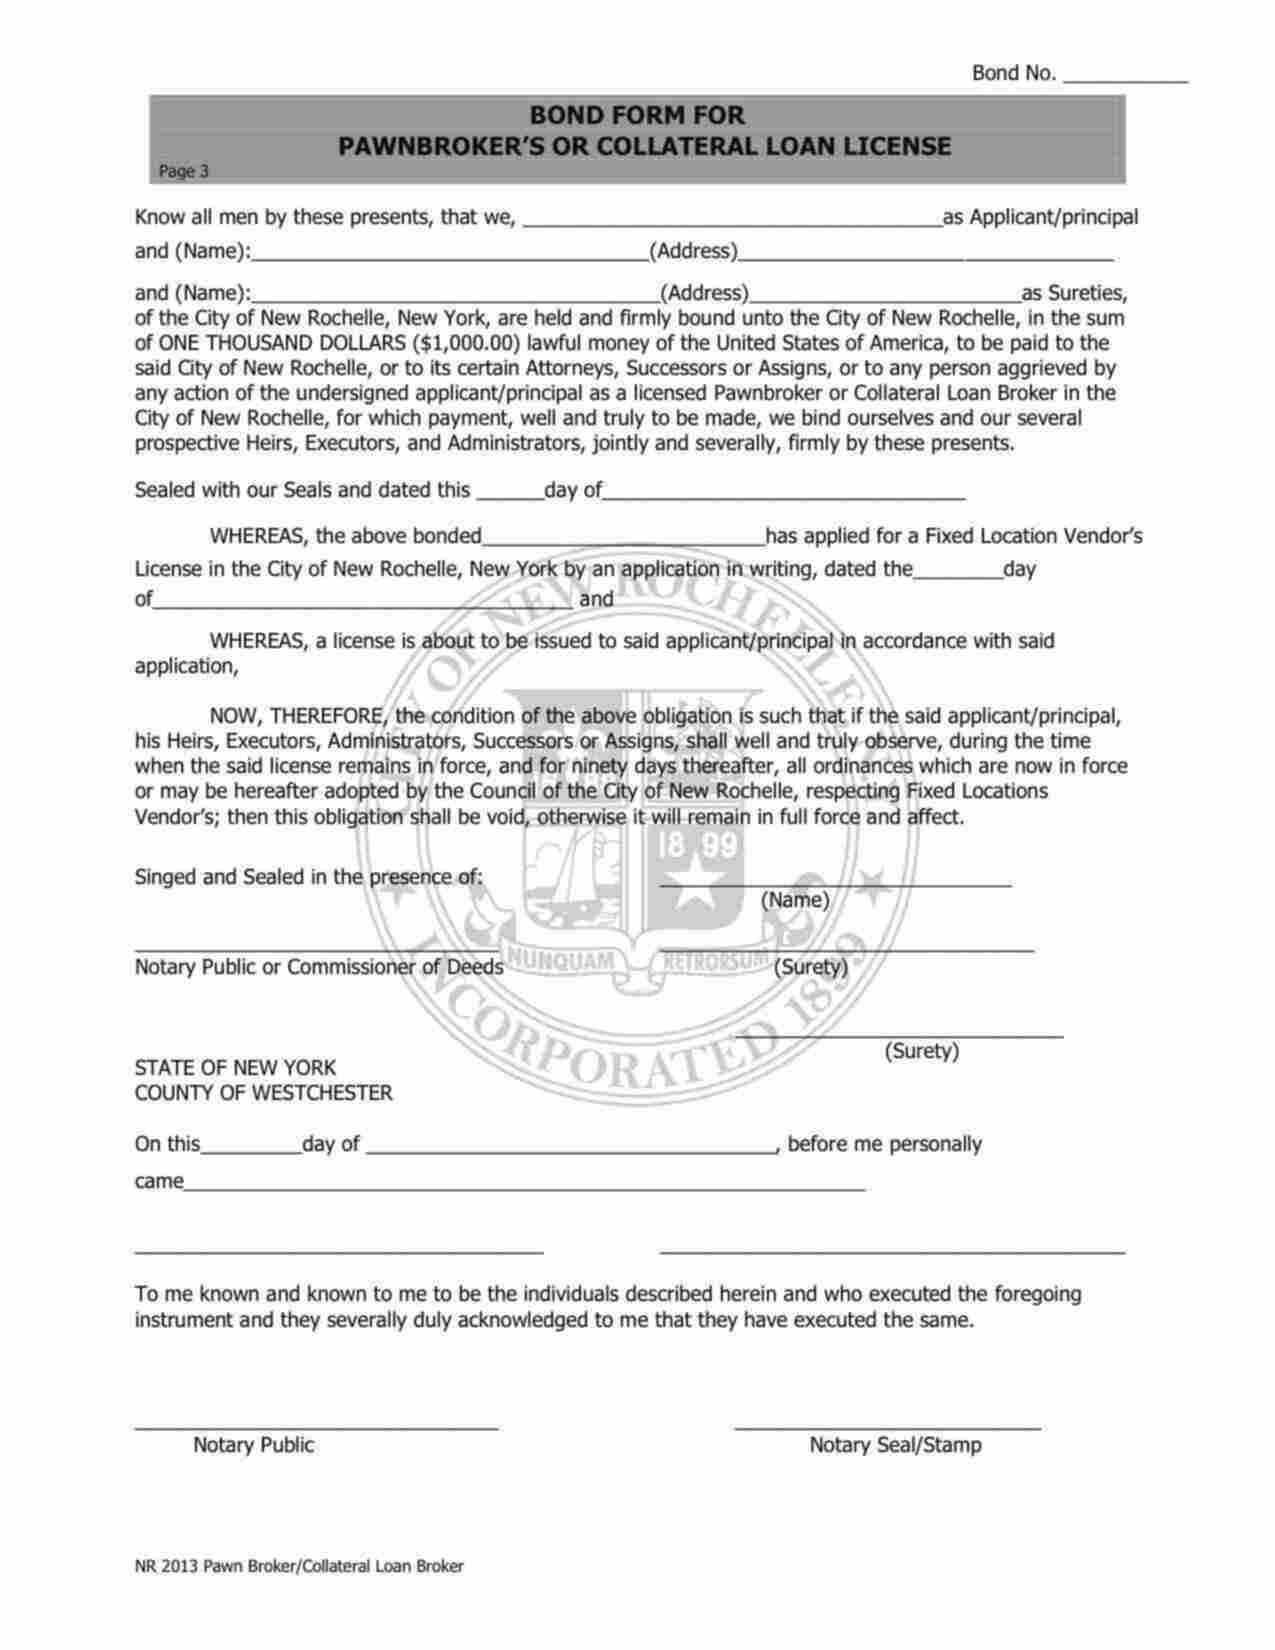 New York Pawnbroker's or Collateral Loan License Bond Form